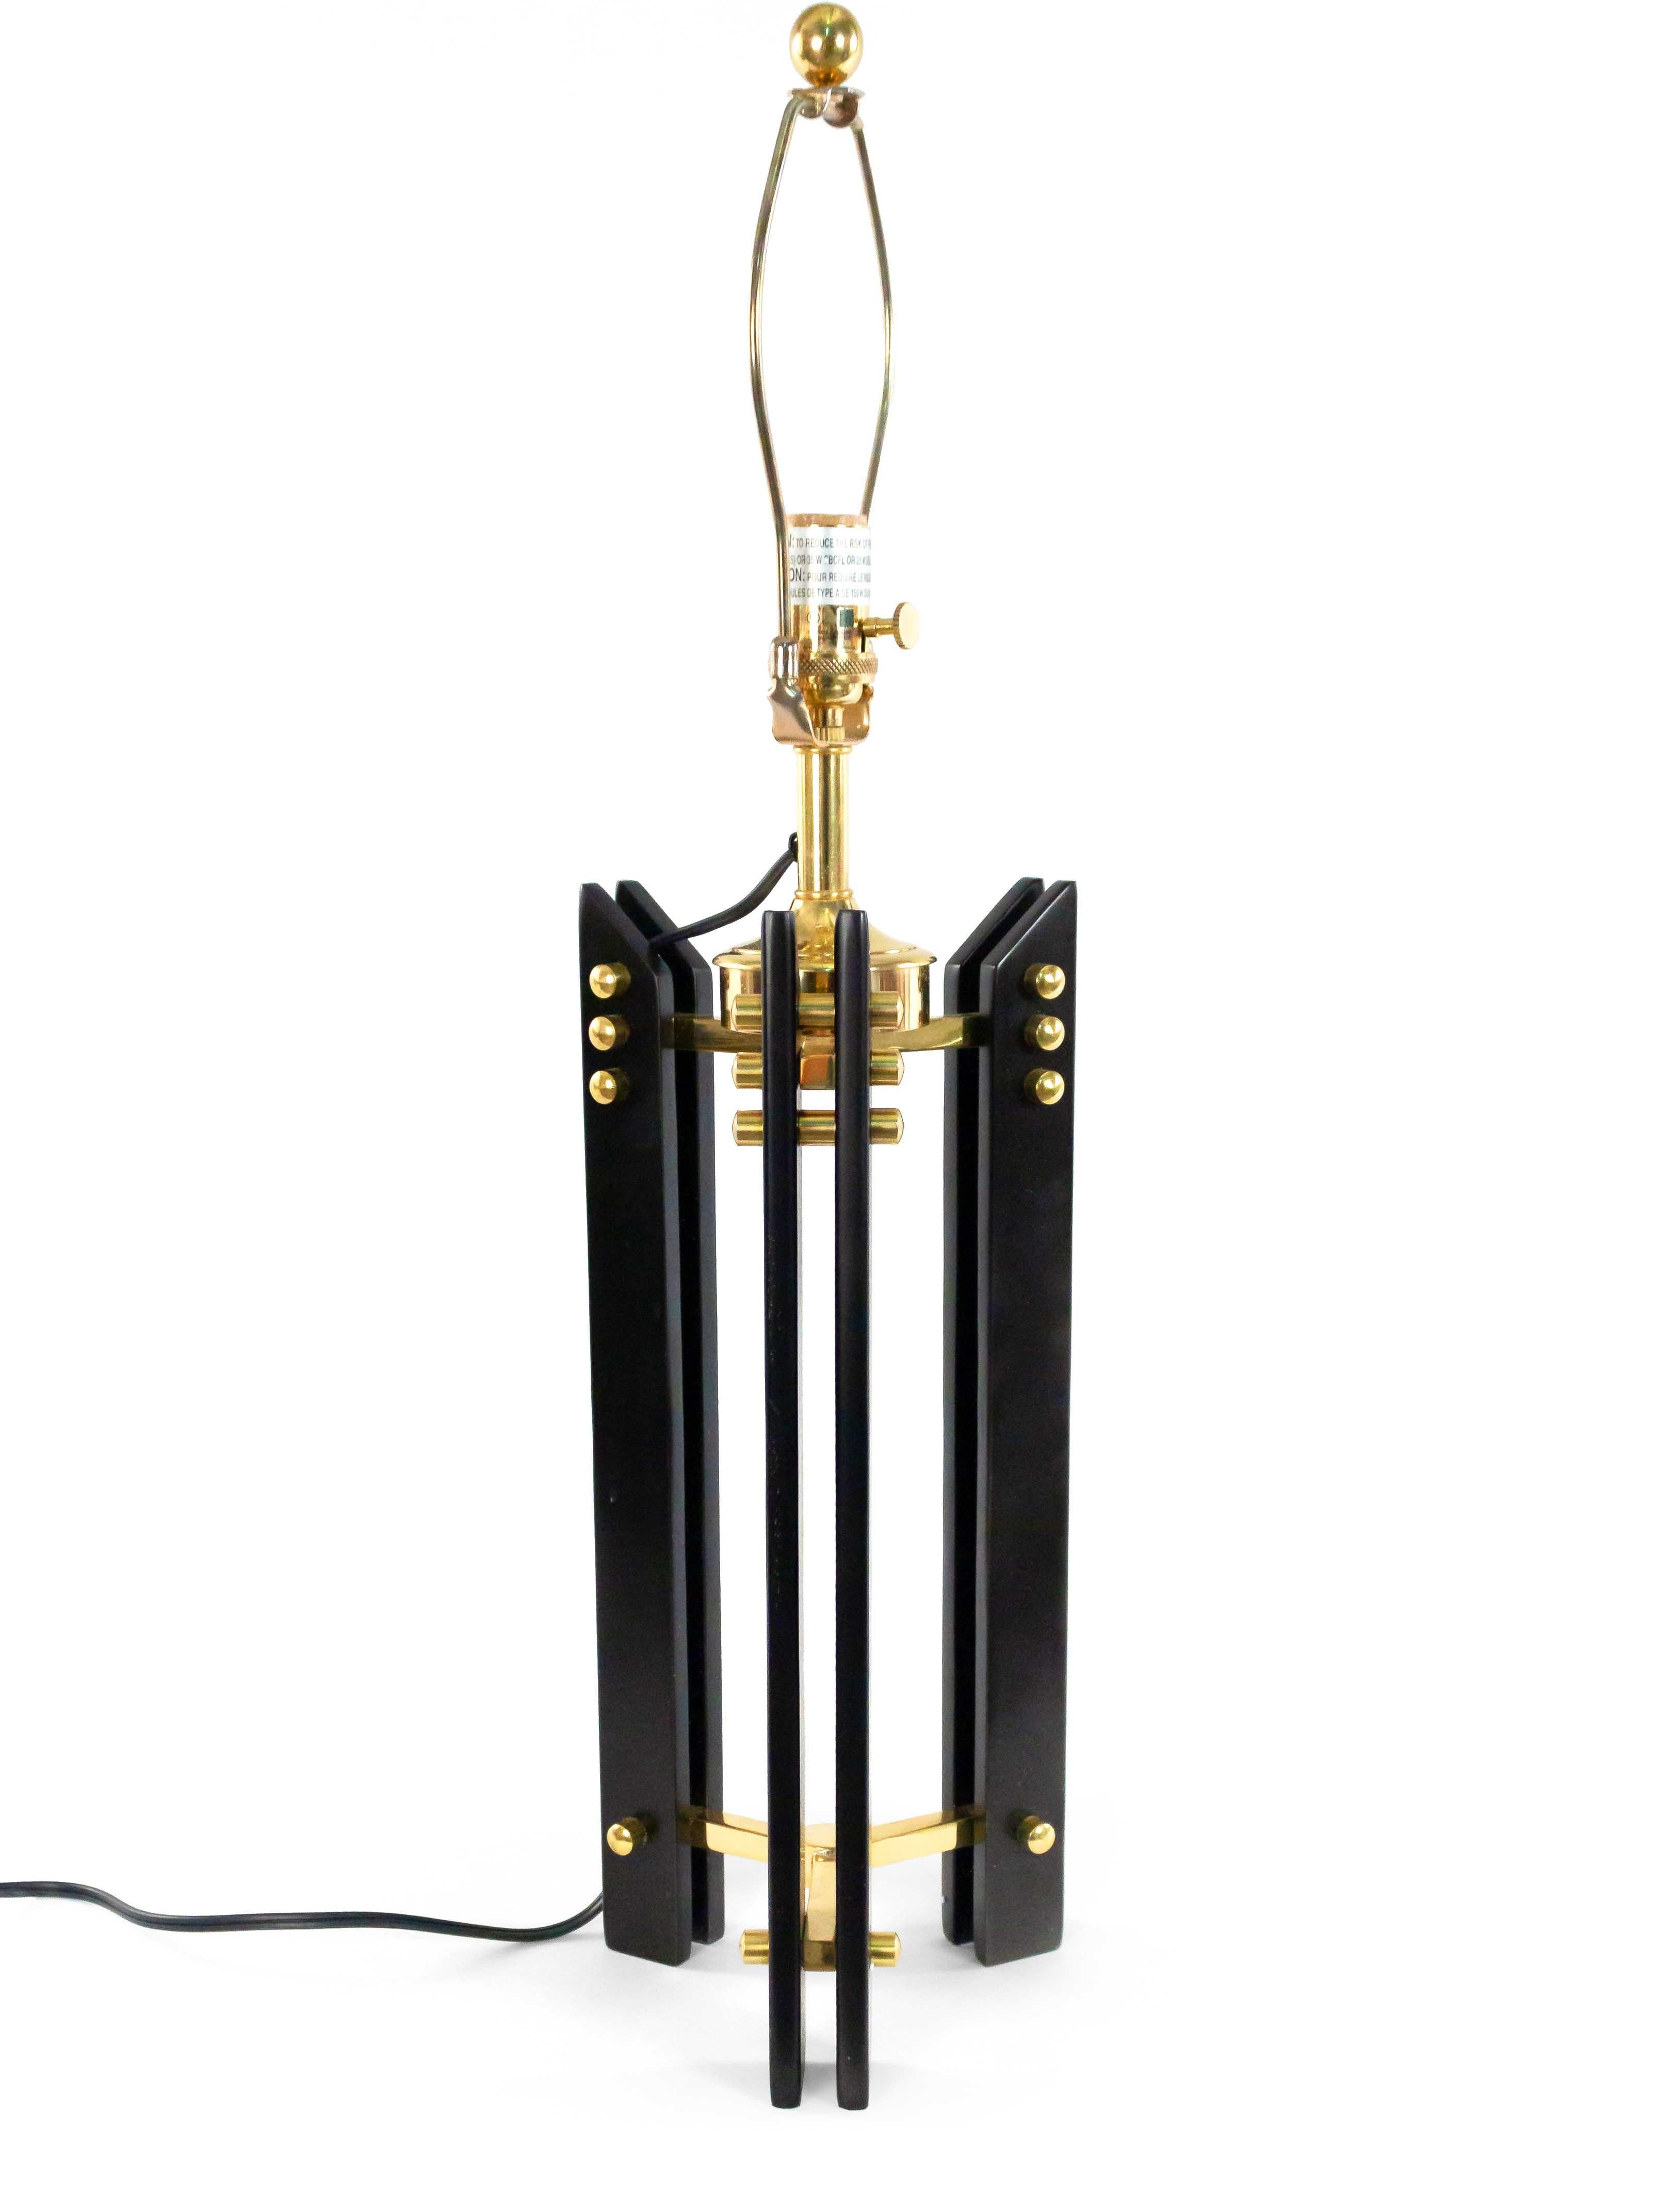 Pair of Mid-Century style black and gold-toned linear tripod table lamps with brass hardware and included harps (PRICED AS PAIR).